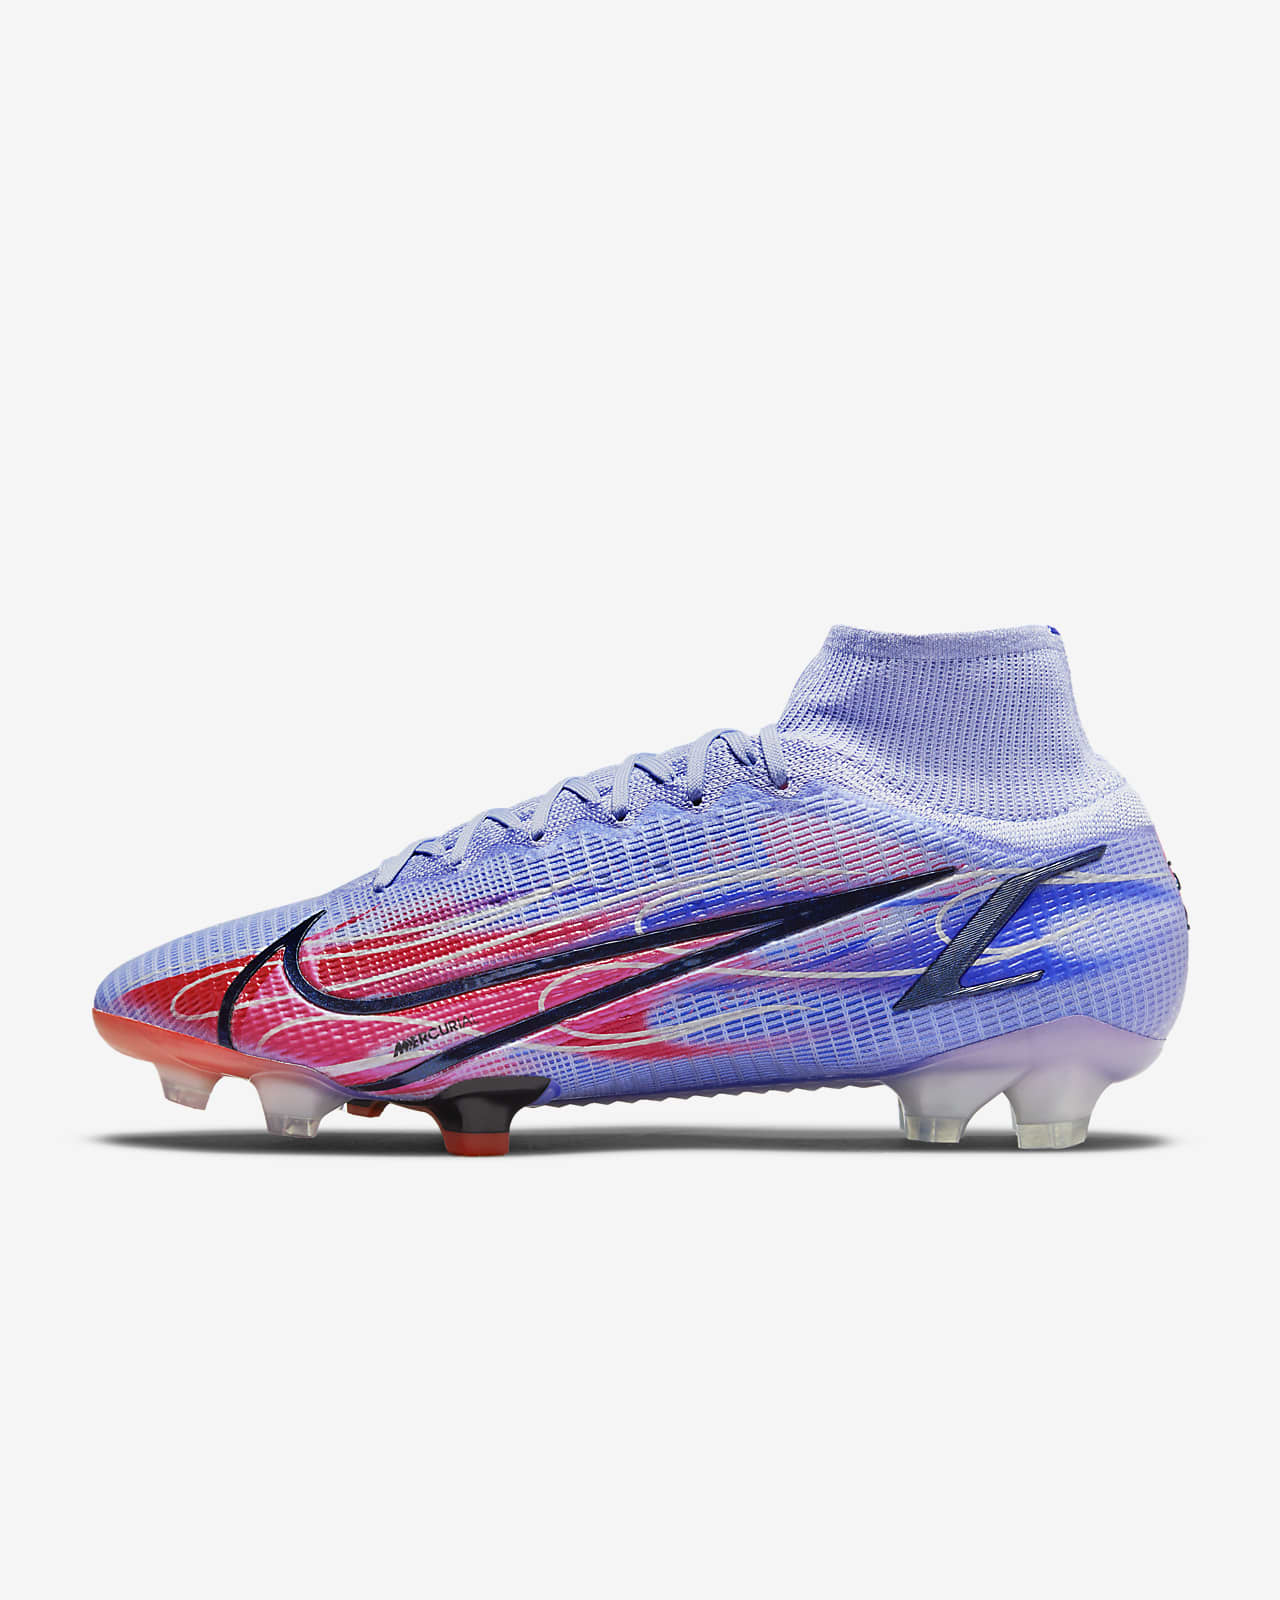 Nike Mercurial Superfly 8 Elite KM FG Firm-Ground Soccer Cleats